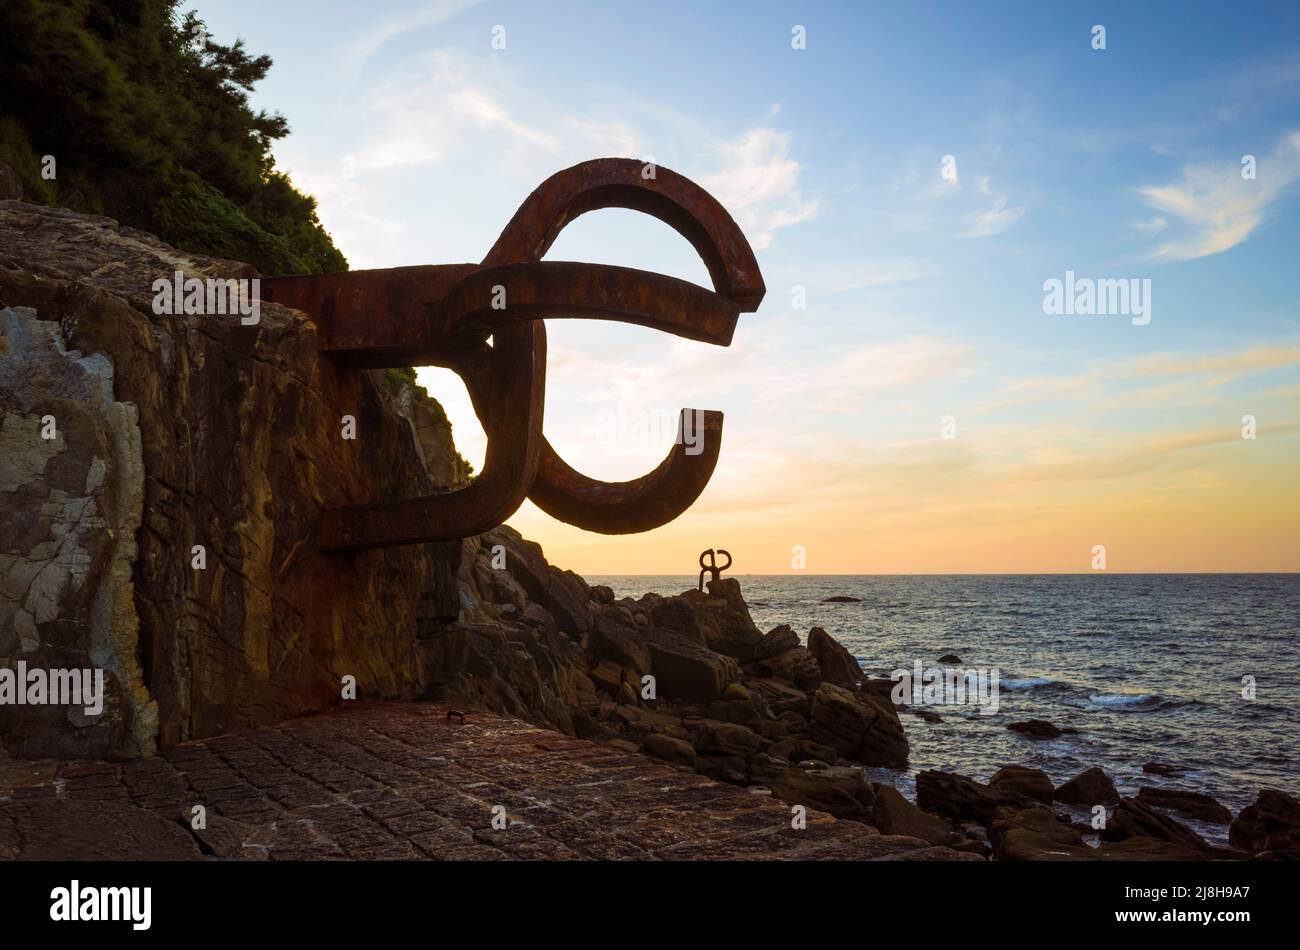 Donostia, Gipuzkoa, Basque Country, Spain - July 15th, 2019 : View at sunset of The comb of the wind (Peine del viento/Haizearen orrazia) sculpture of Stock Photo